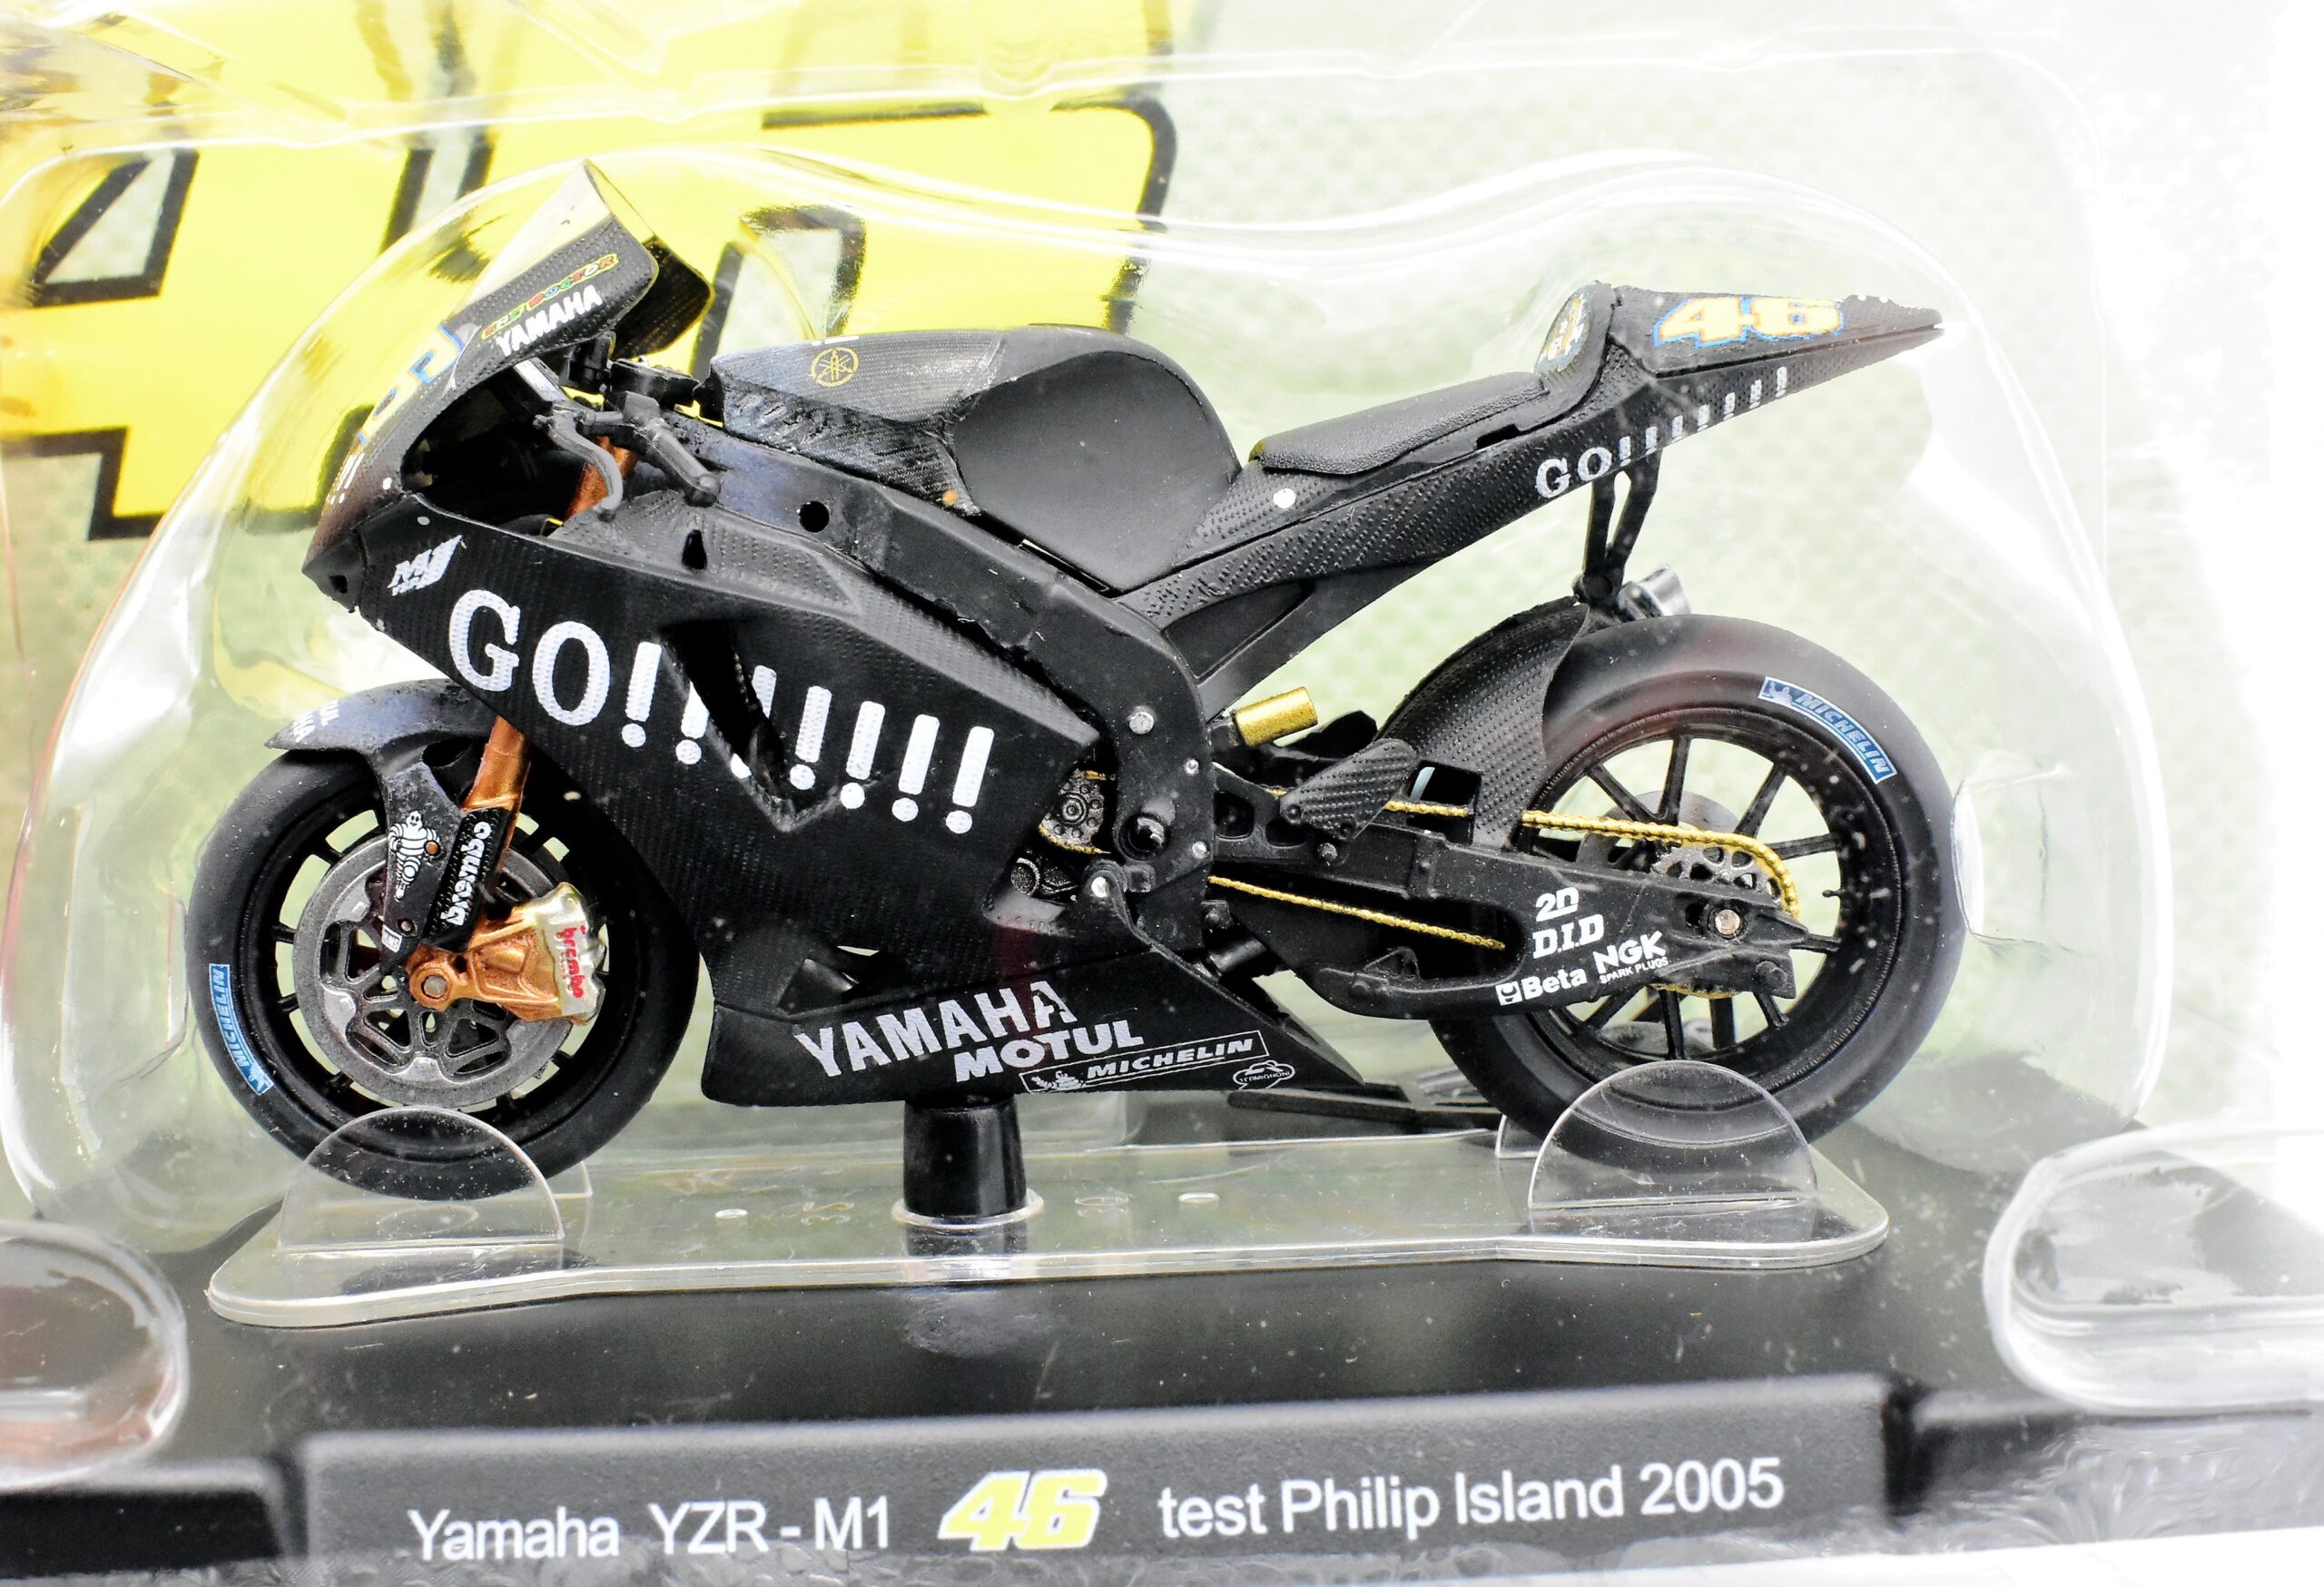 Valentino Rossi motorcycle models 1:18 scale YAMAHA YZR-M1 gp motor bikecollection